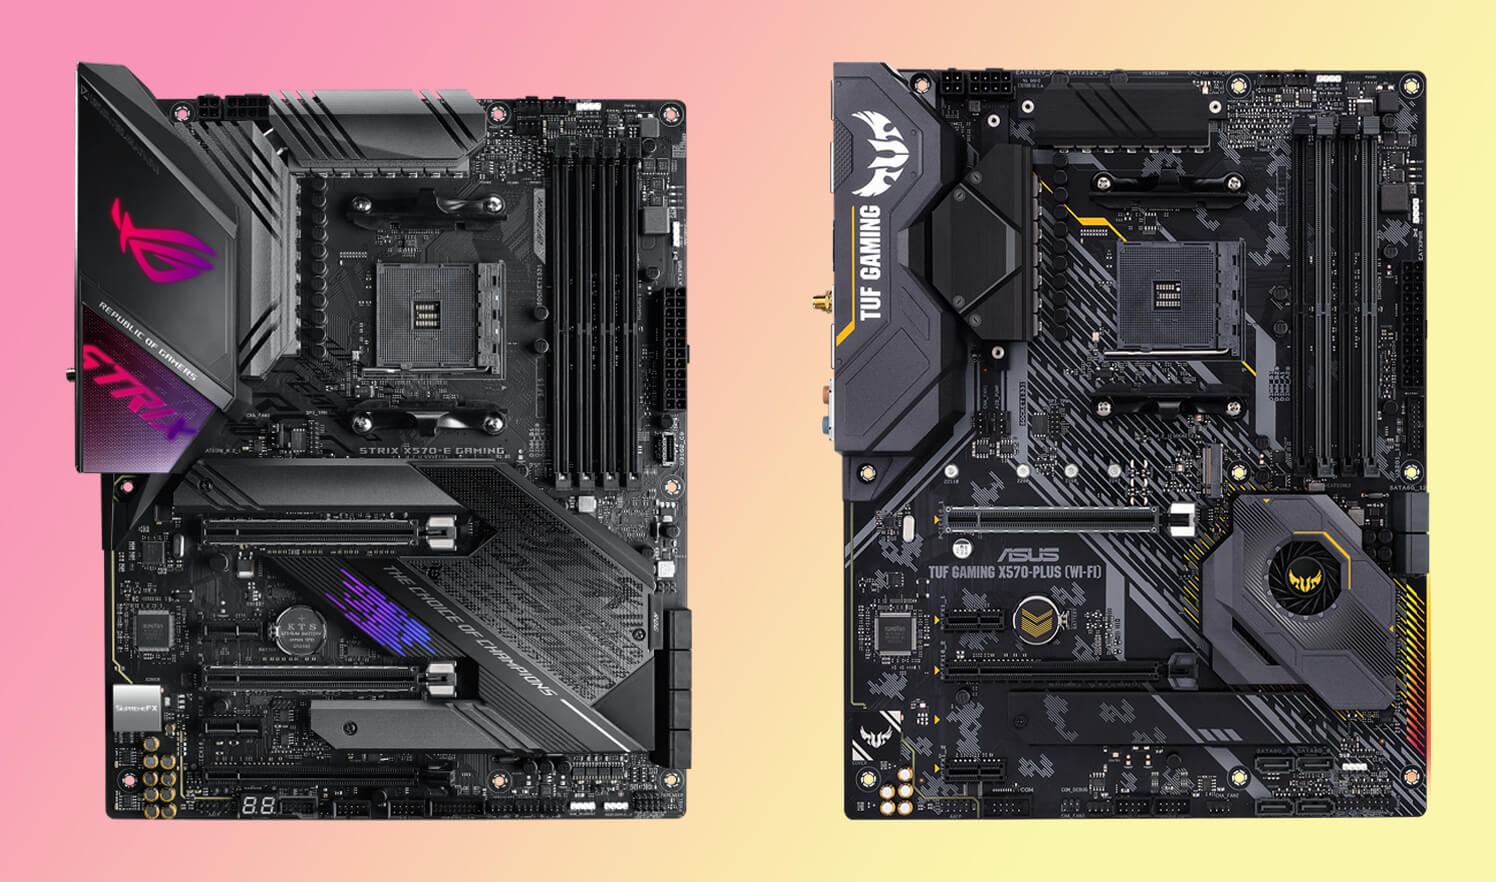 Best Motherboards for RTX 3090